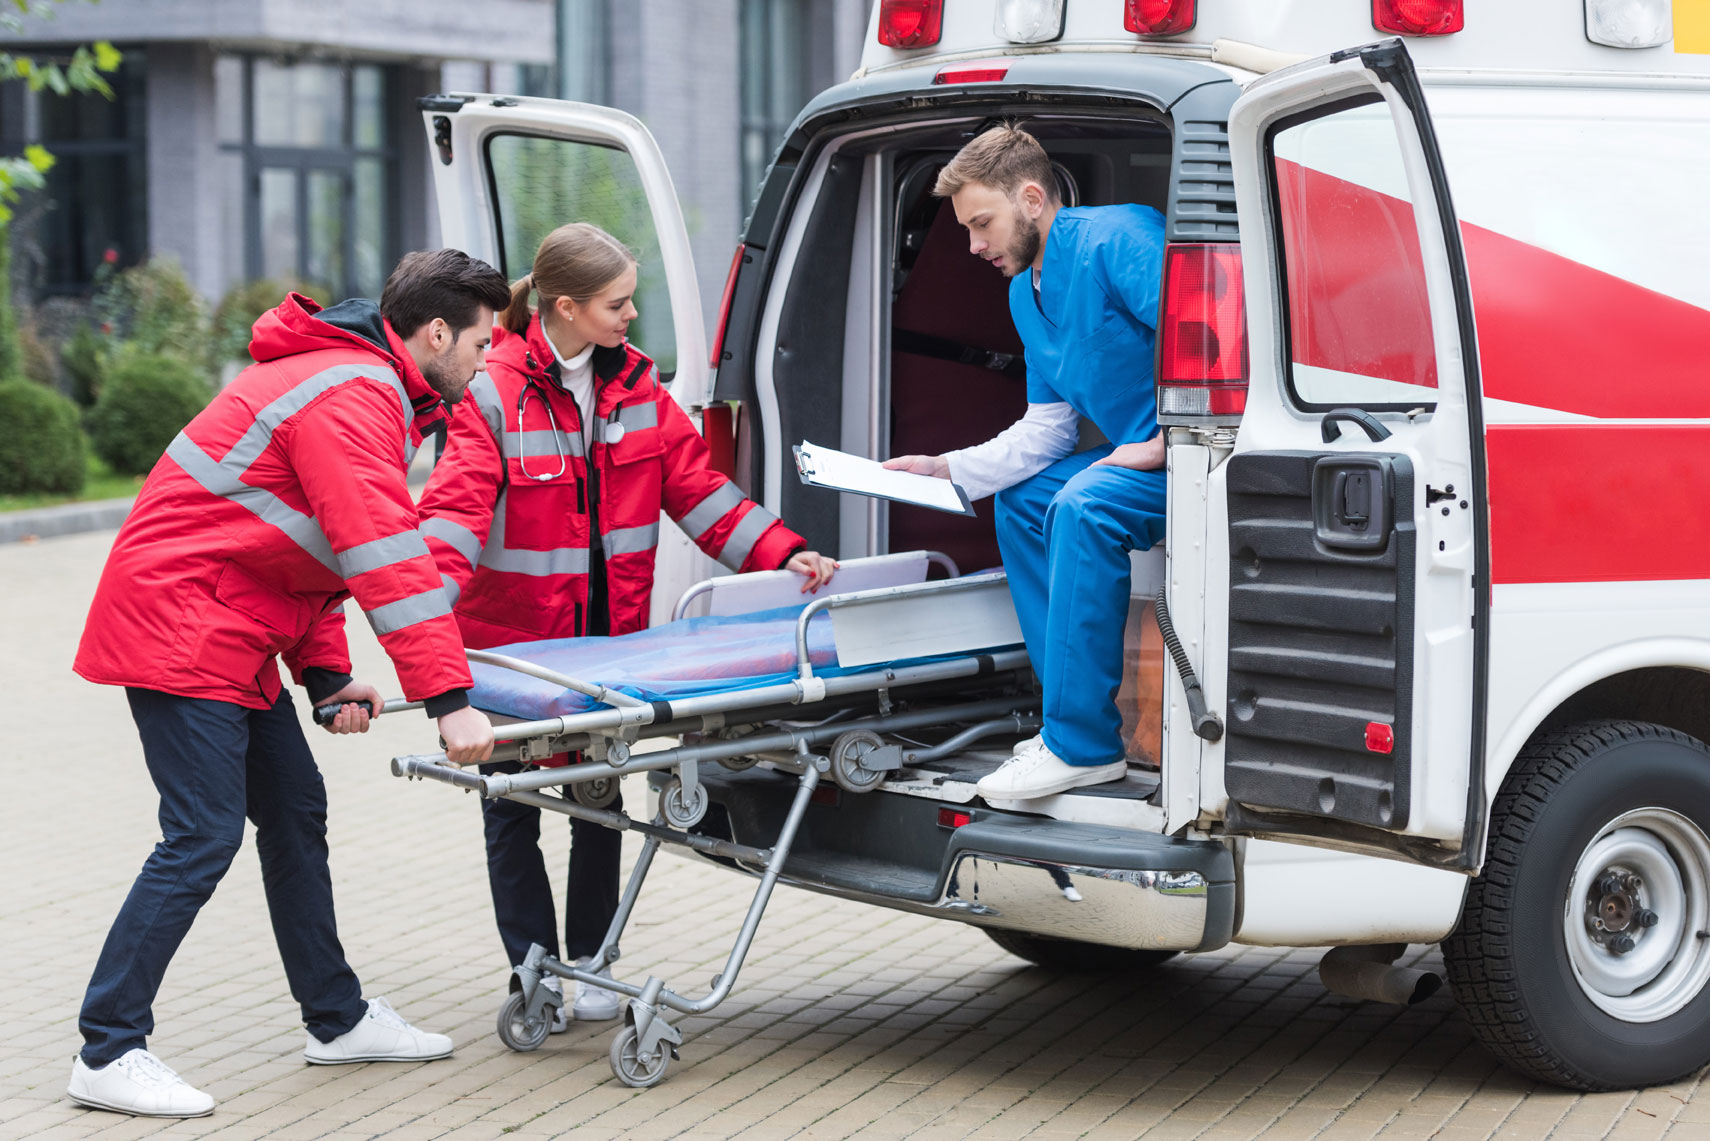 Paramedics Unloading a Stretcher From an Ambulance | Medical Equipment Services in Houston, TX